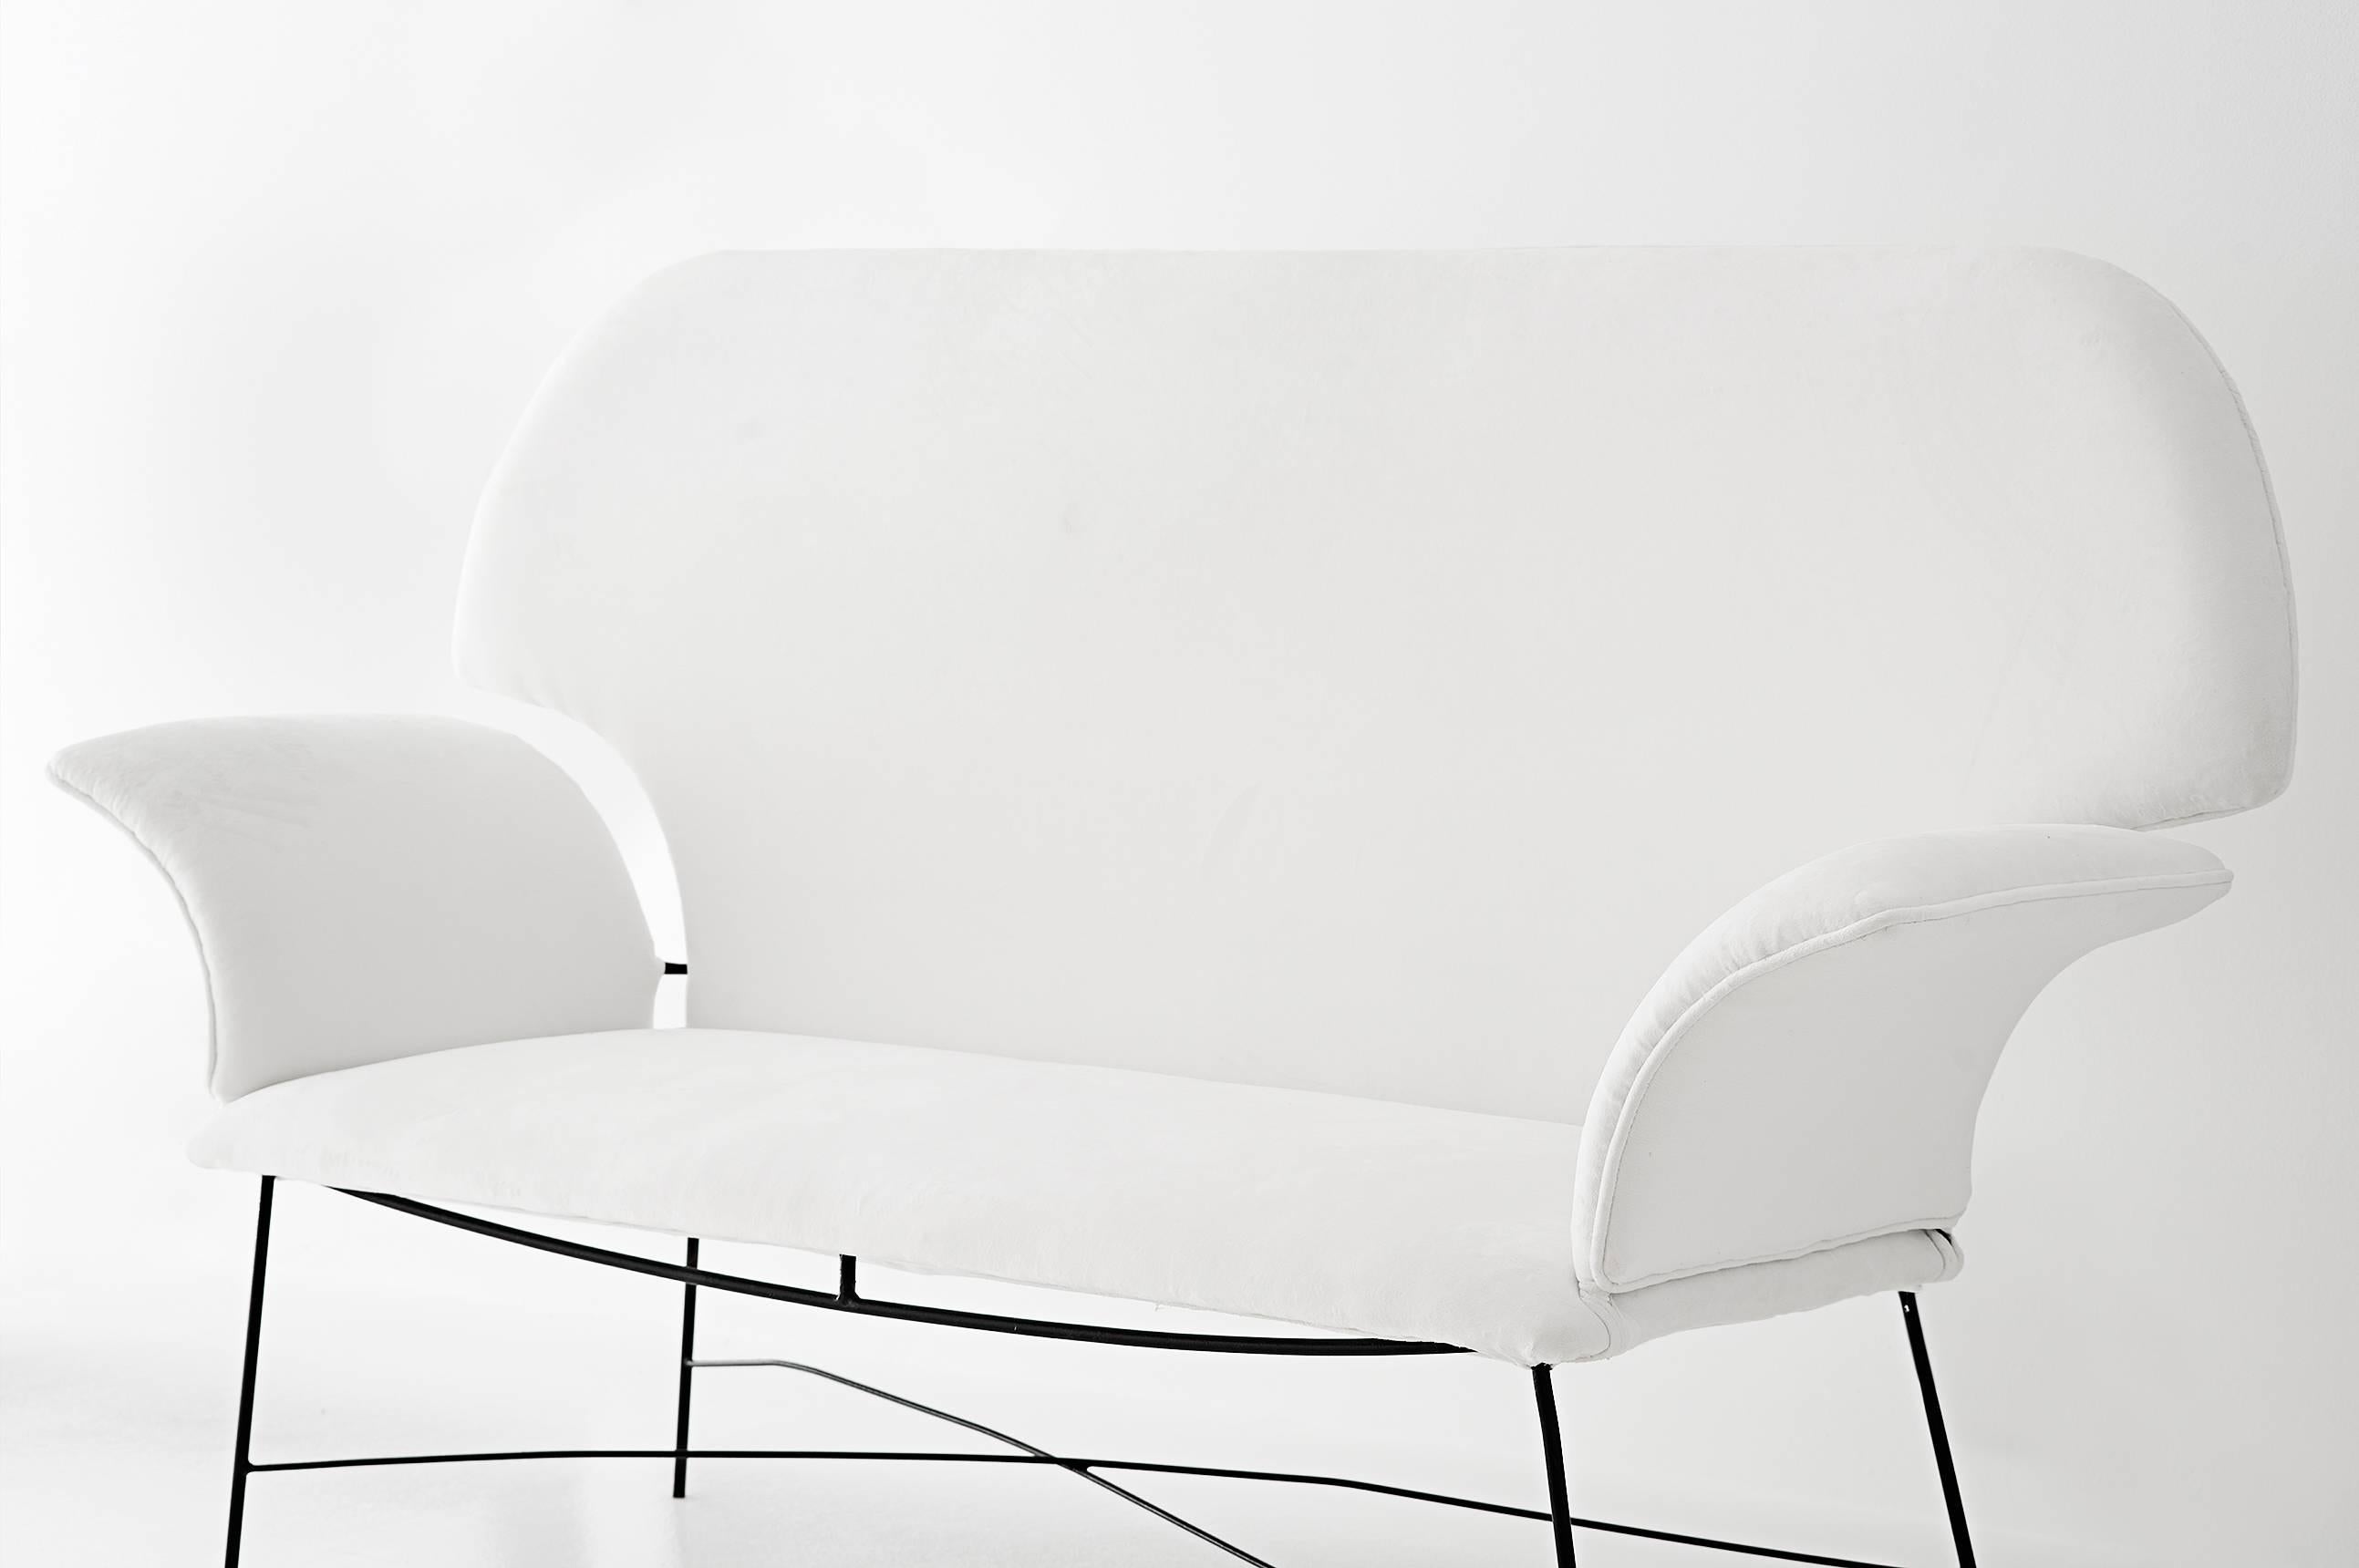 Martin Eisler (1913-1977) and Carlo Hauner (1927-1997)

Sofa
Manufactured by Forma Moveis
Brazil, 1950s
Black painted metal, white/cream fabric upholstery

Measurements:
170 cm x 64 cm x 110 H cm.
67 in x 25.2 in x 43.3 H in.

Literature
Brazil